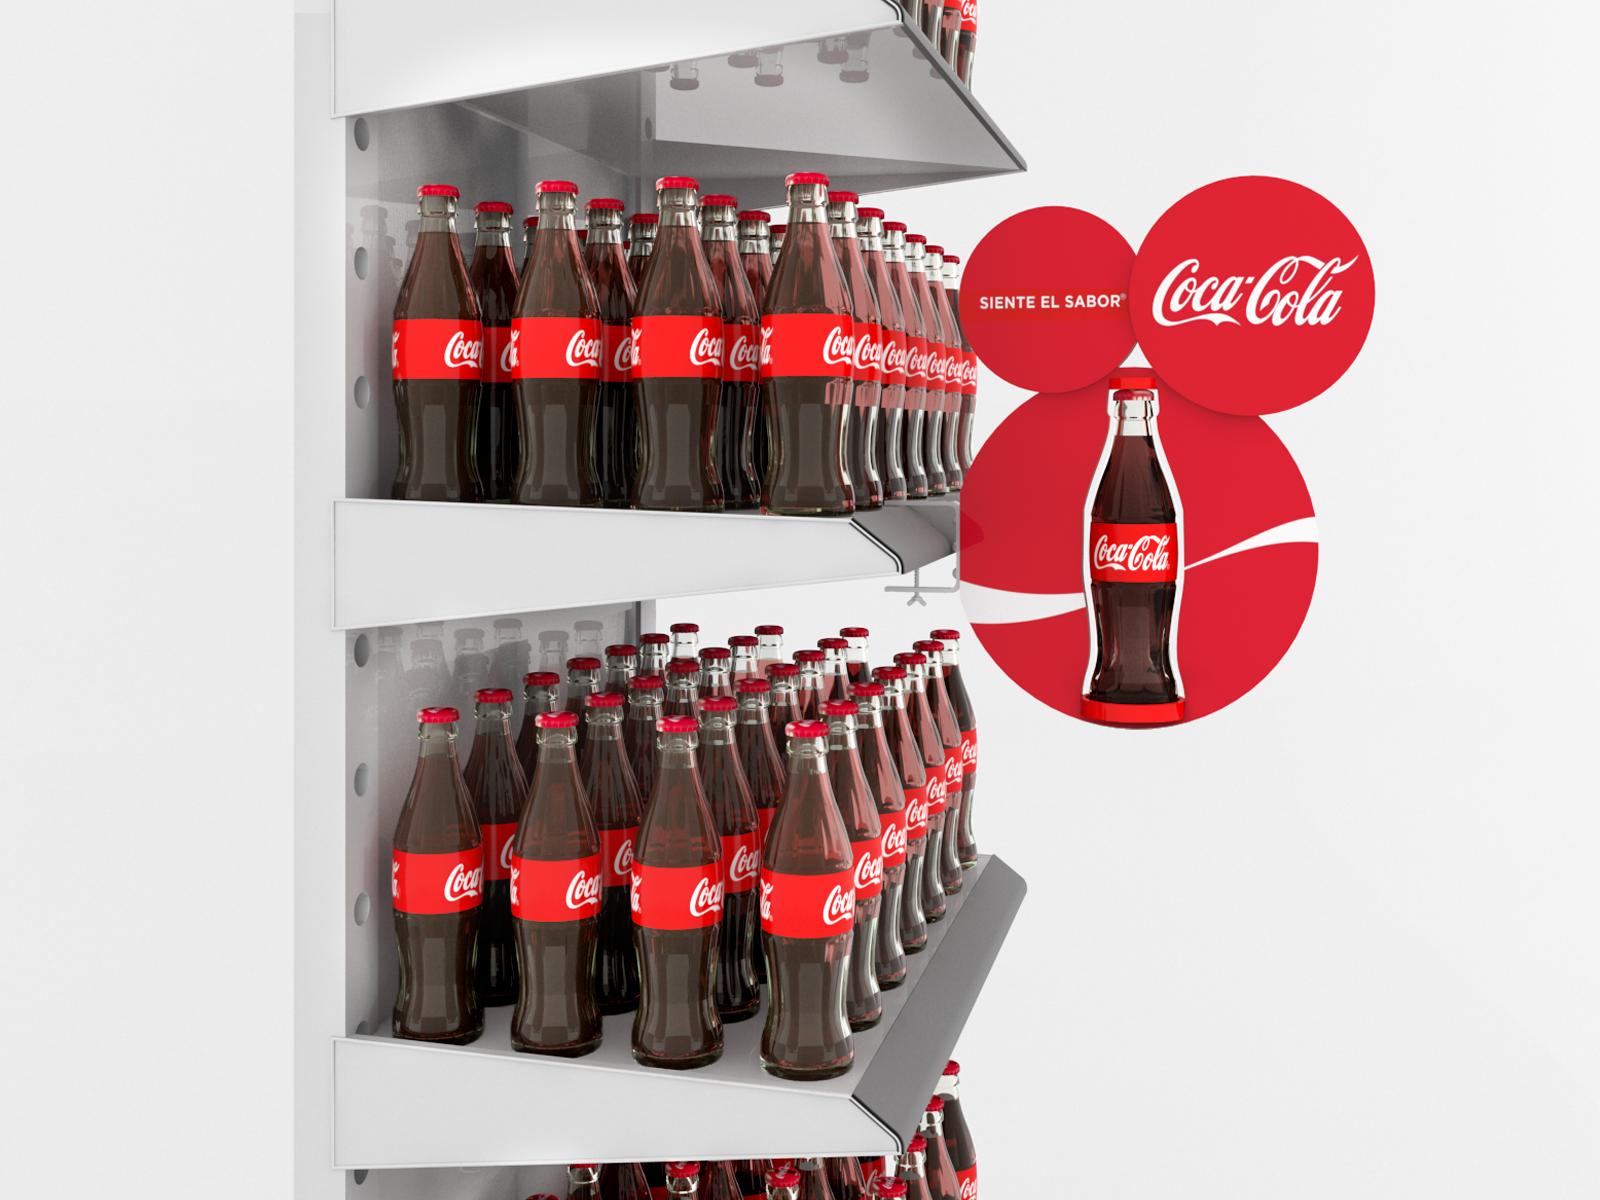 Coca Cola Display by Ariana Caballero on Dribbble